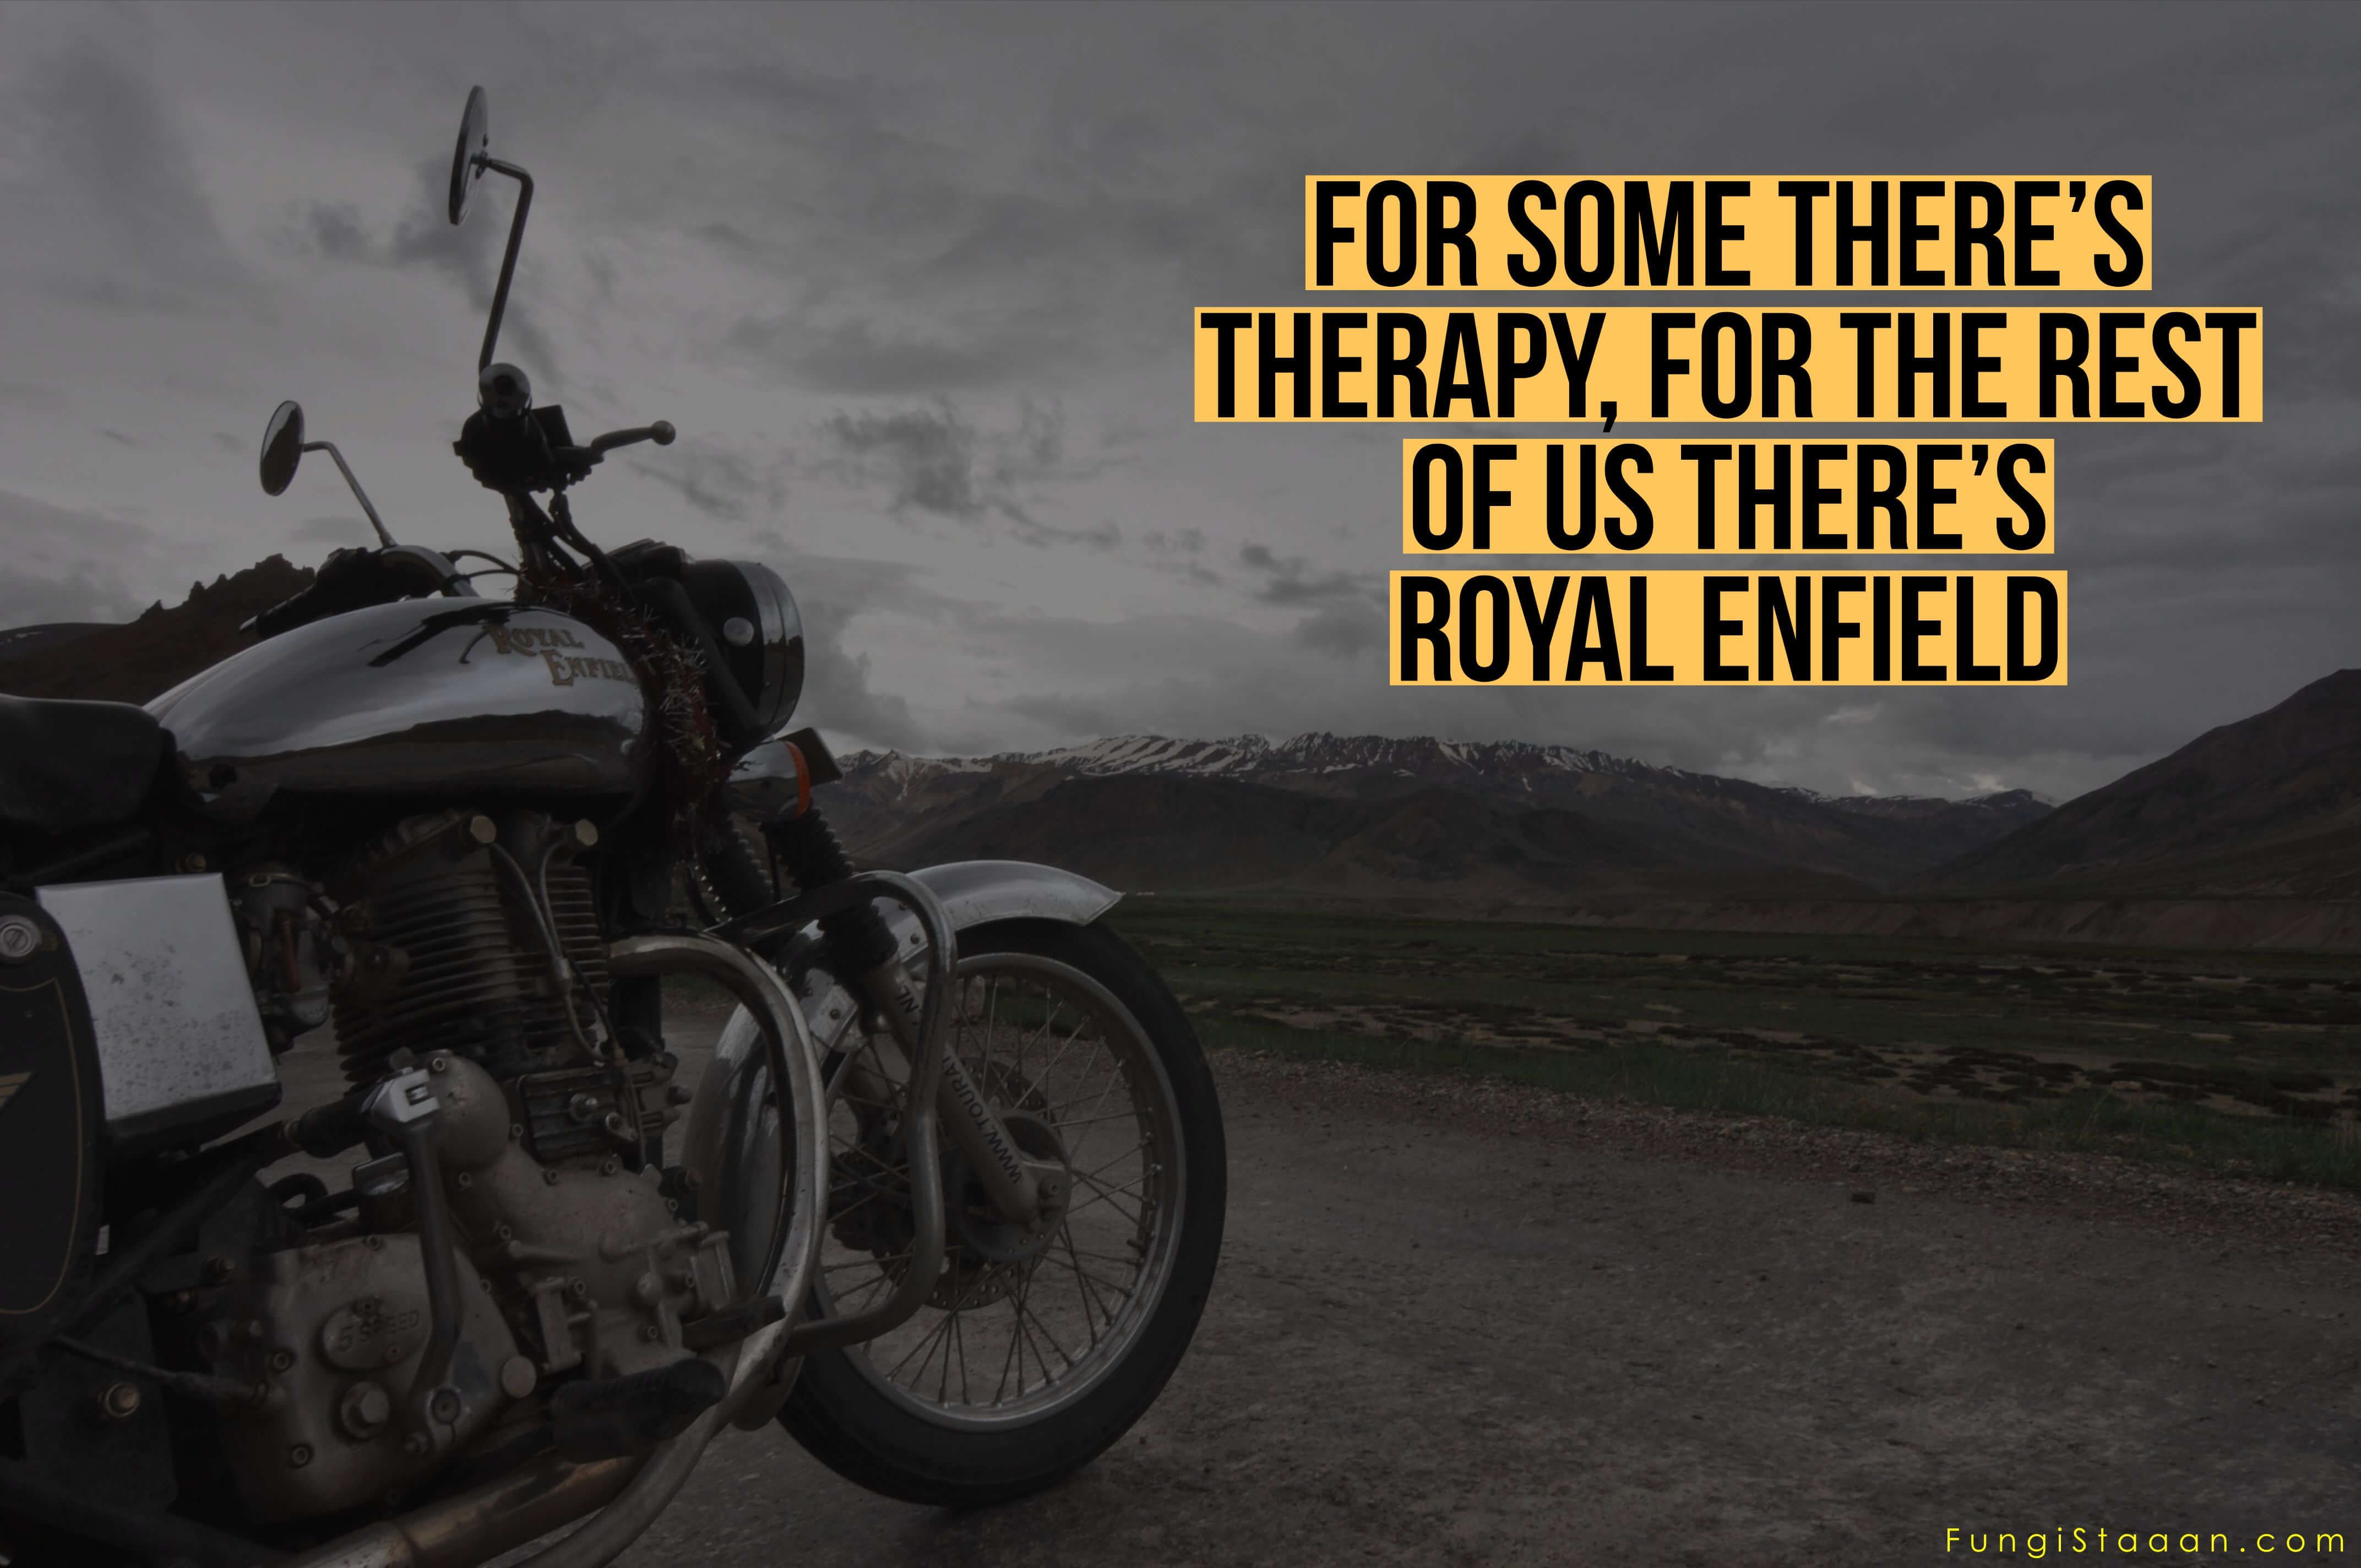 Check Out Our Latest Collection of Royal Enfield Quotes Sayings Image. #royalenfield #bike #quotes #bikequote. Royal enfield, Bullet bike royal enfield, Enfield